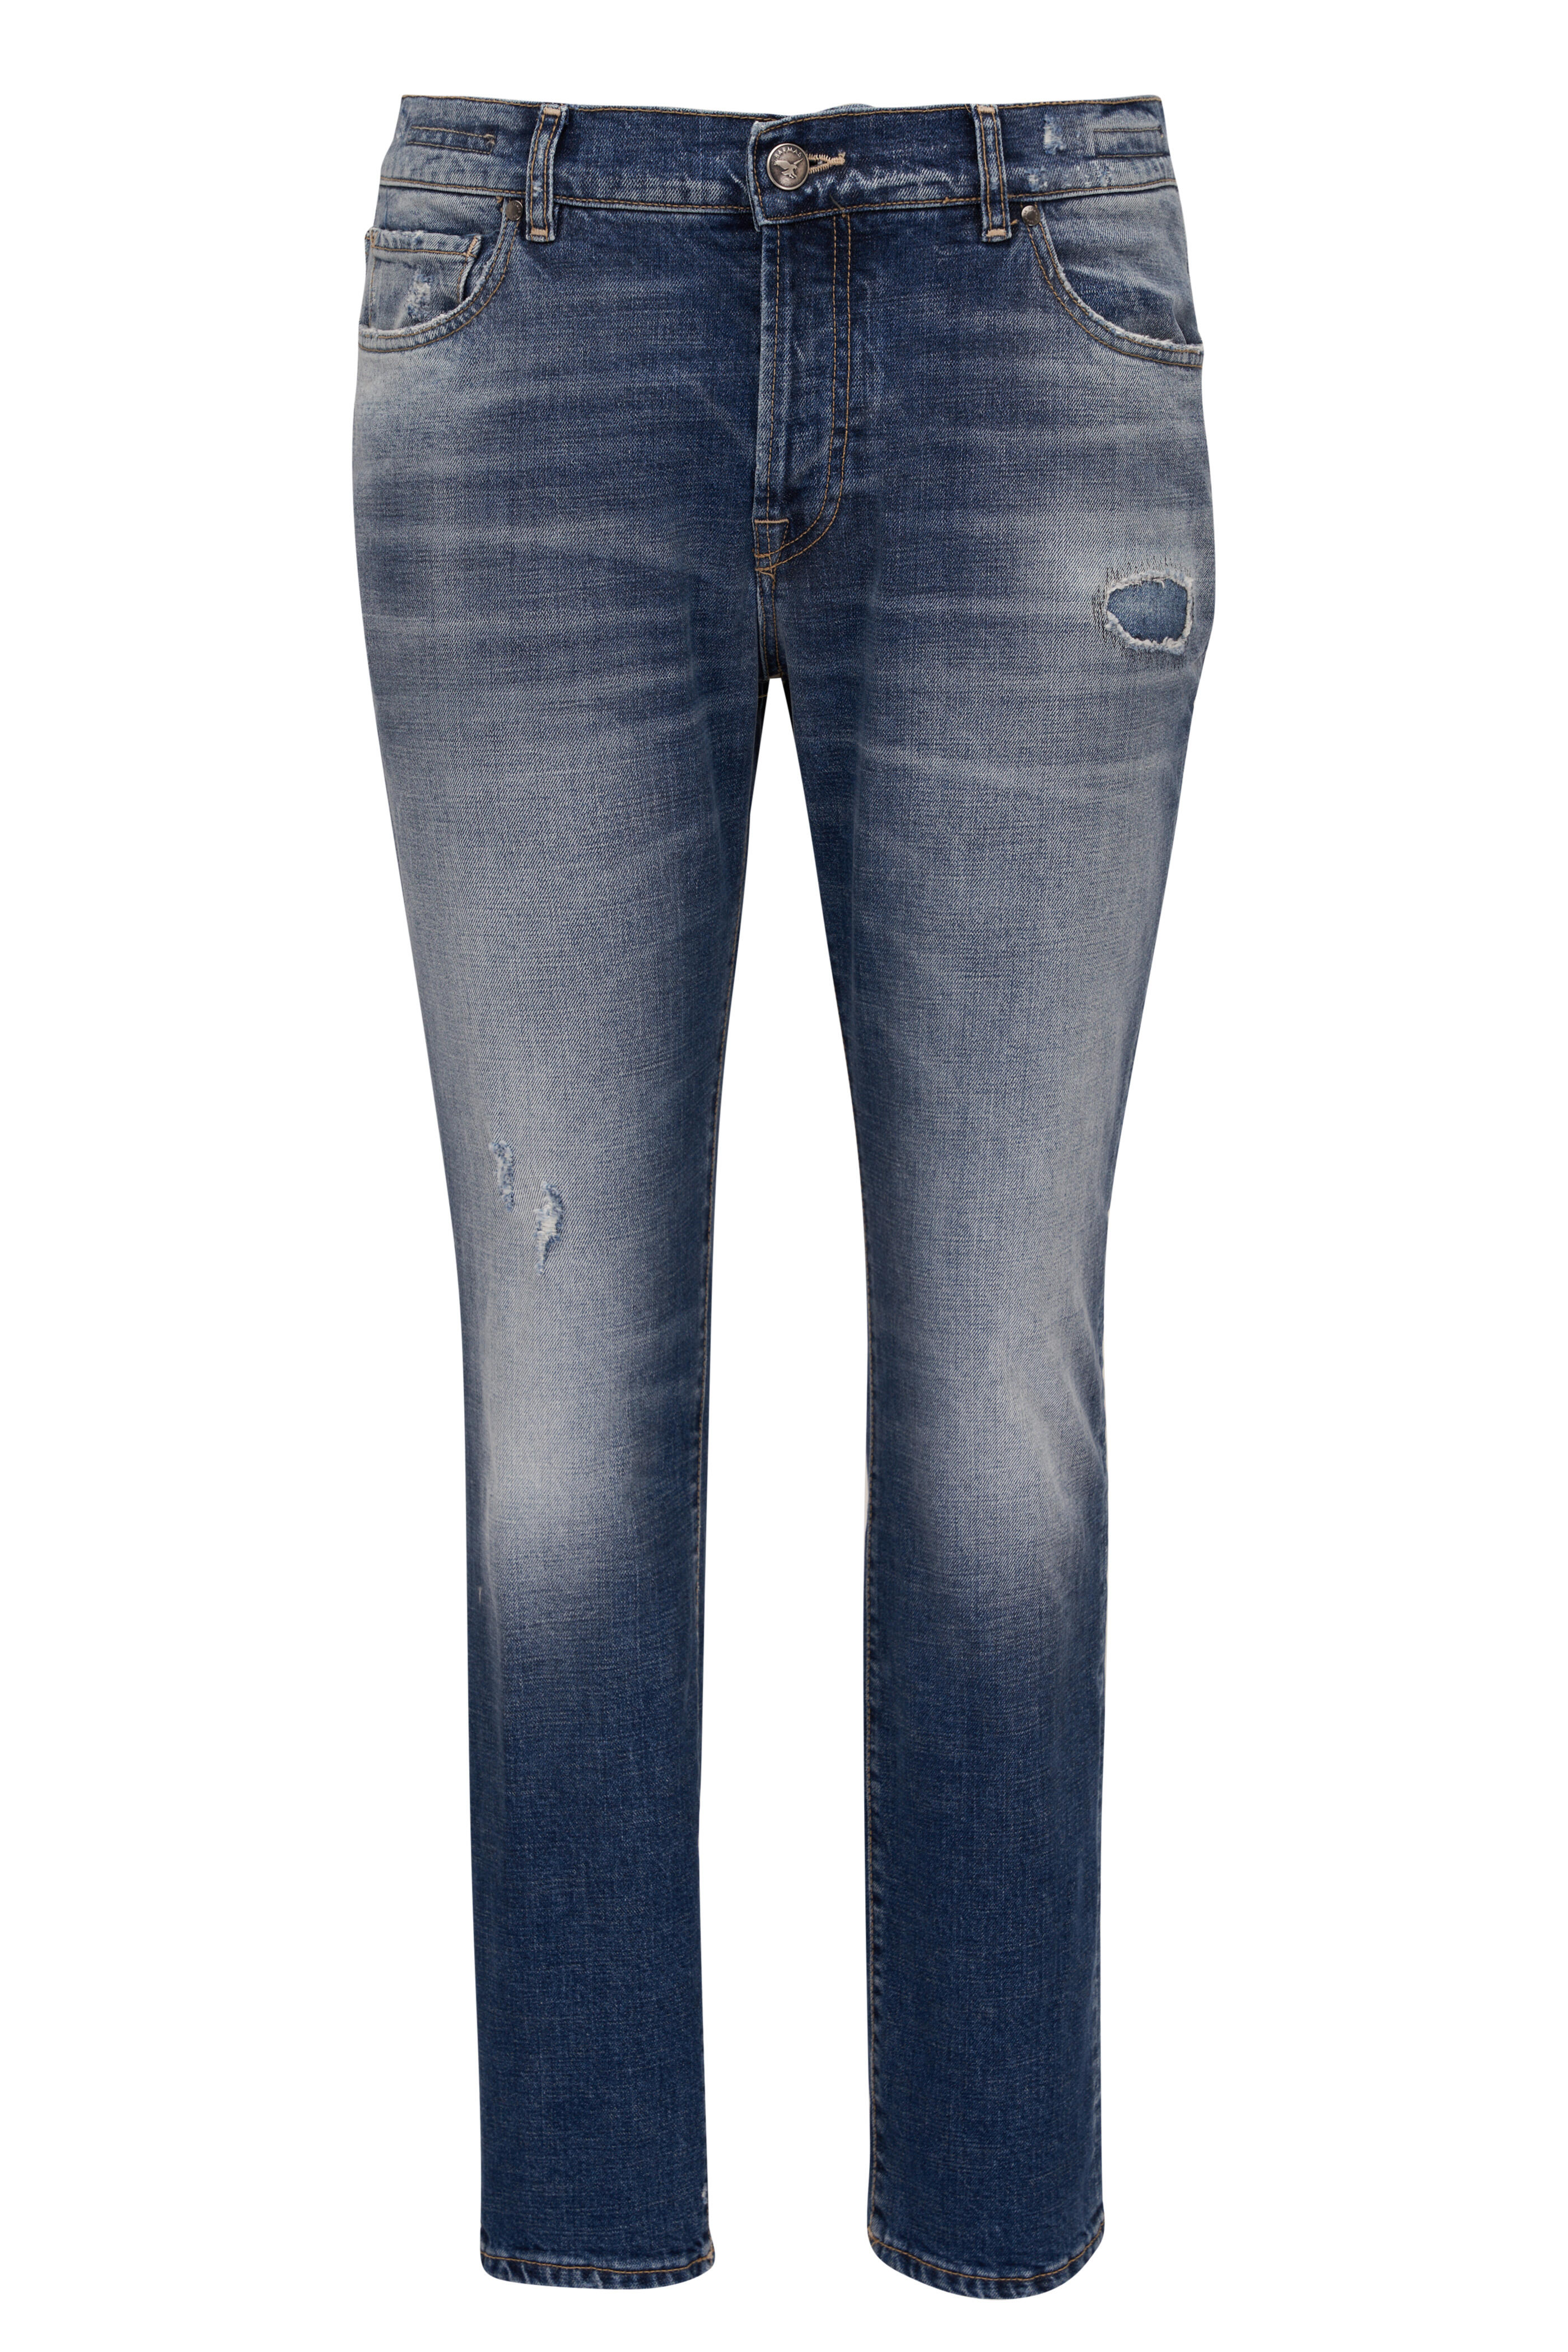 Barmas - Denver Denim Ripped & Repaired Jean | Mitchell Stores